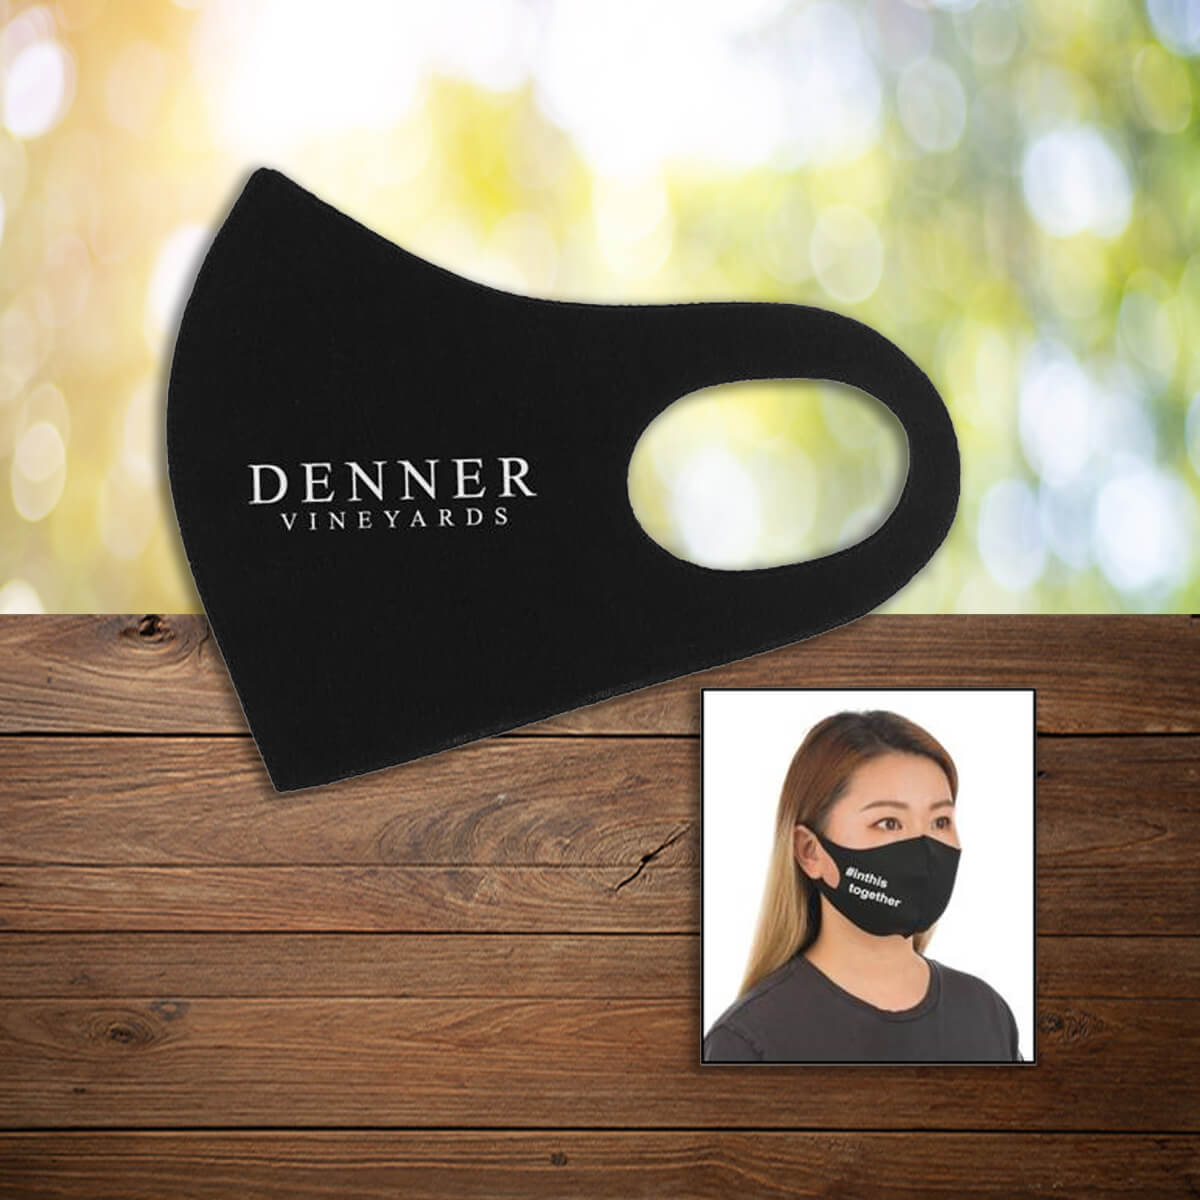 Stretchy black company branded face masks promotional wellness & safety by curative printing